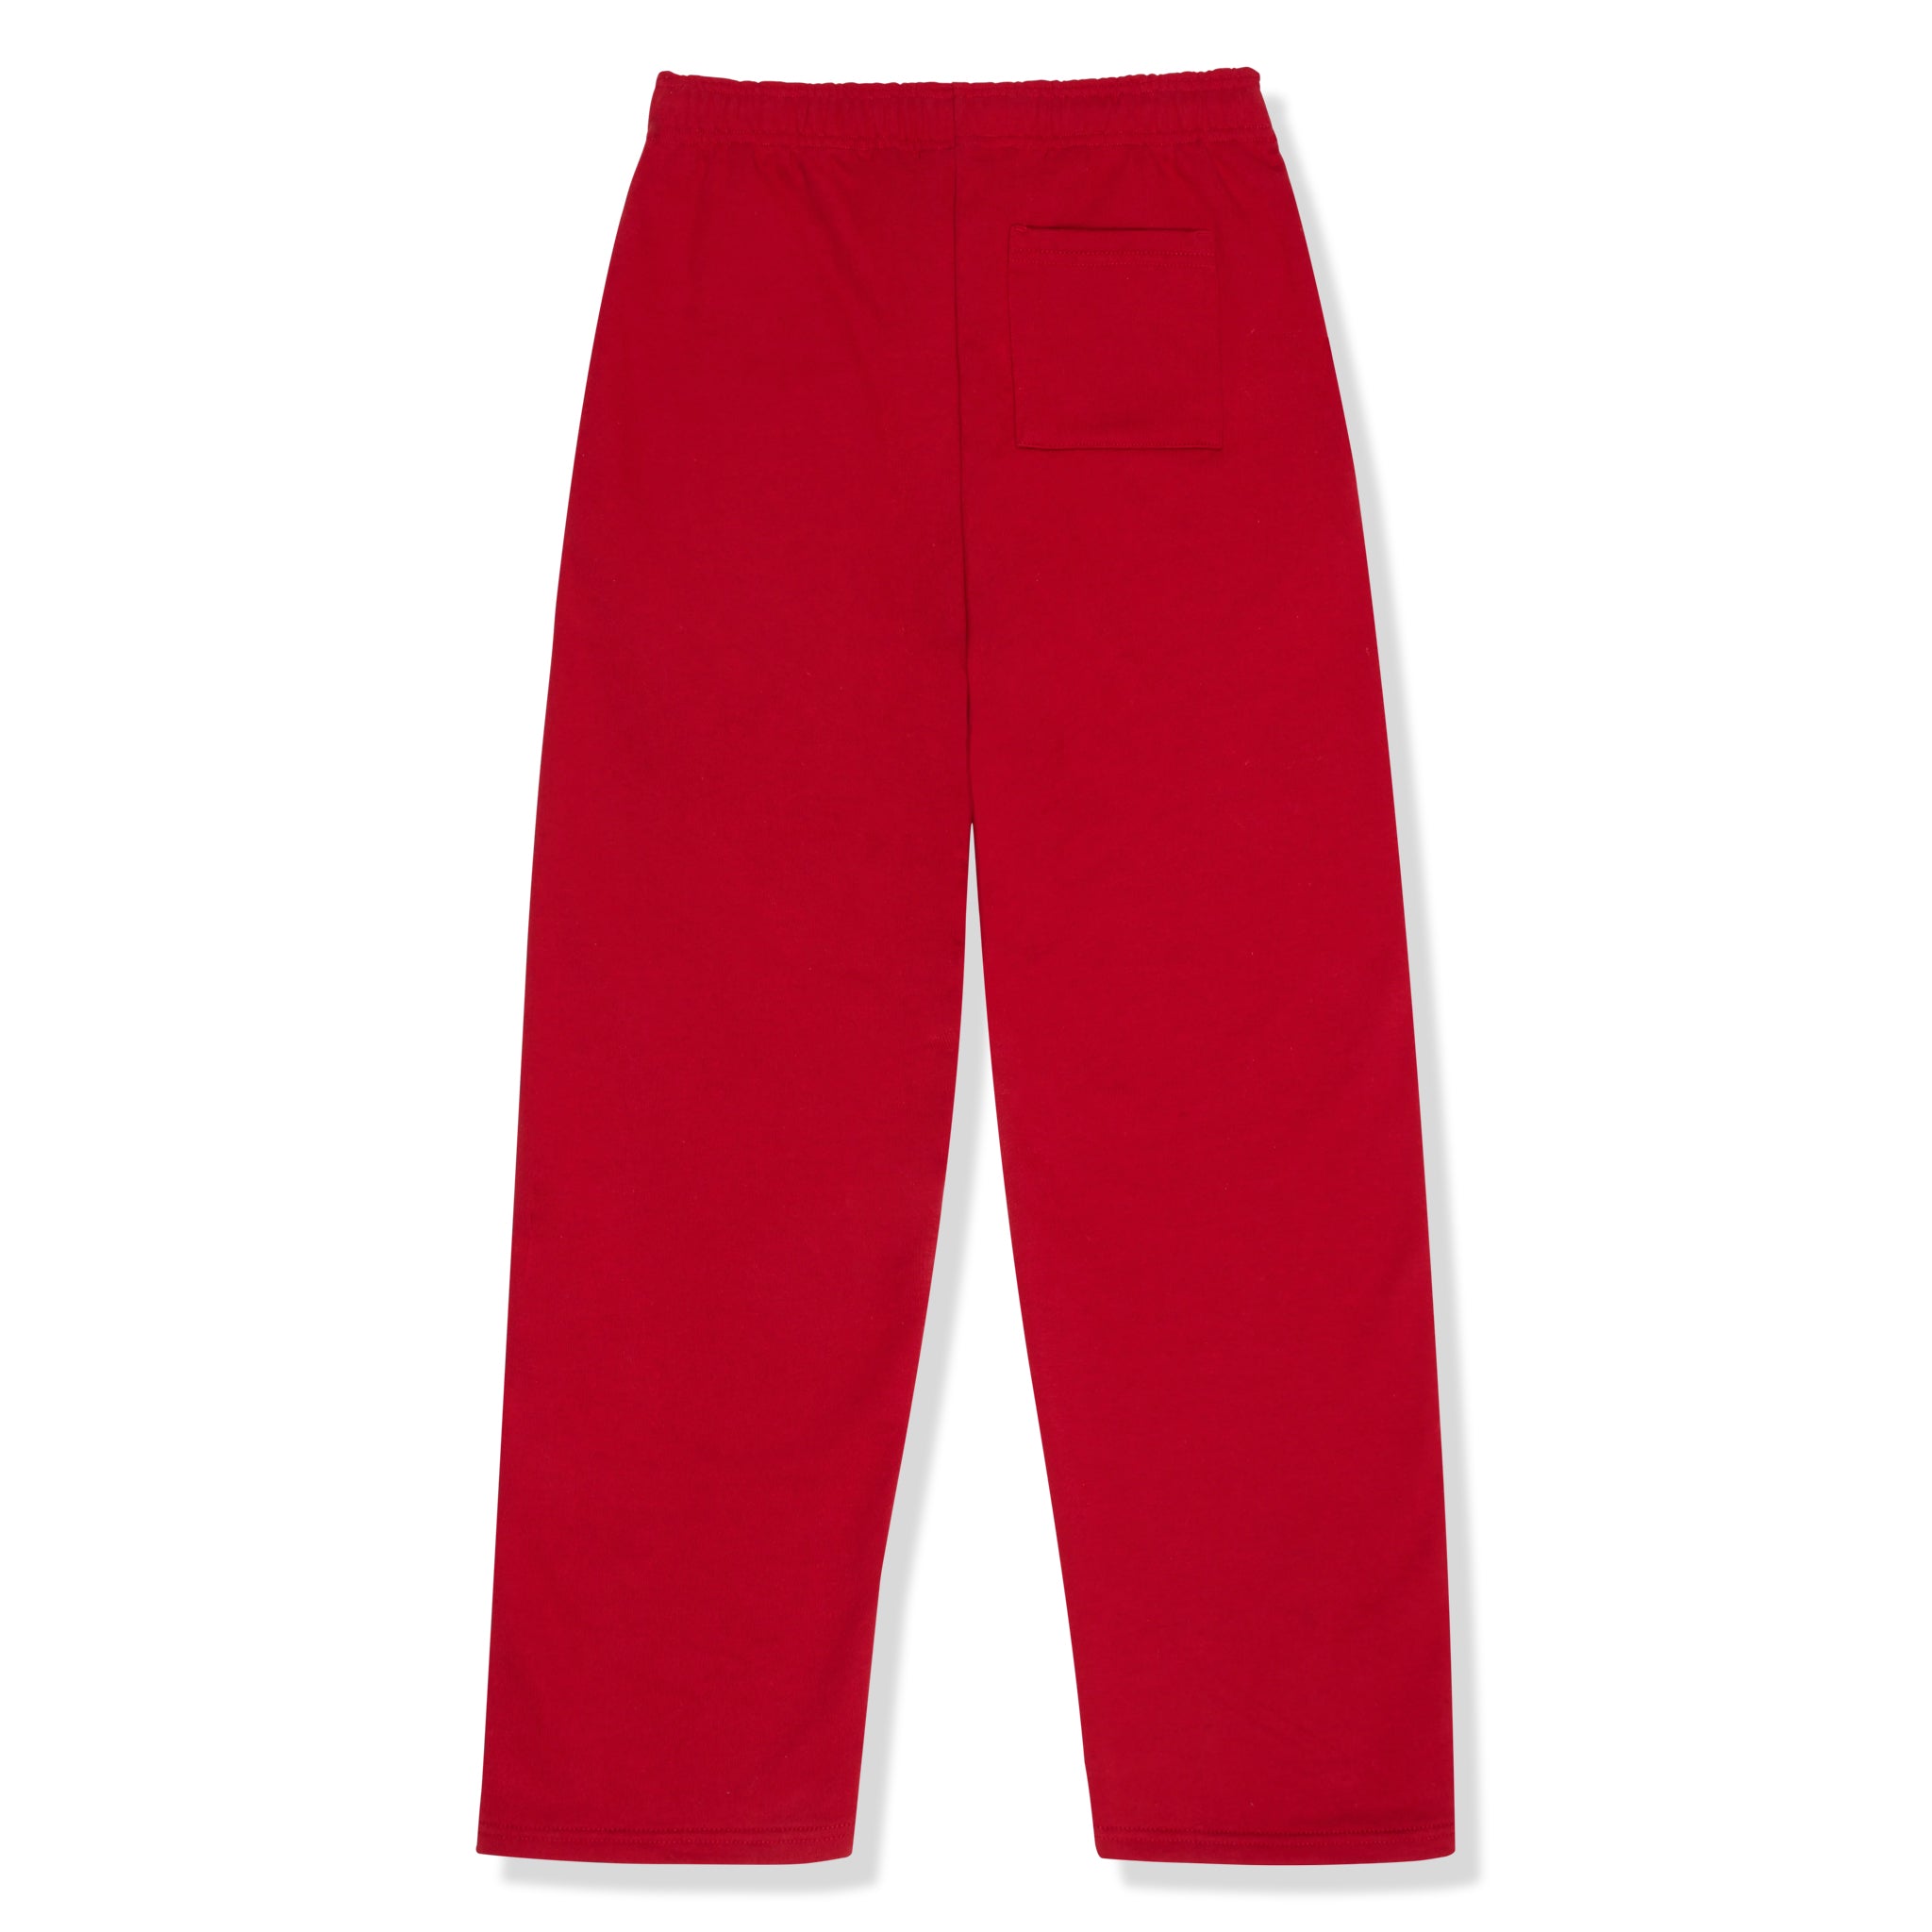 Back view of Broken Planet Straight Leg Sweatpants Ruby Red